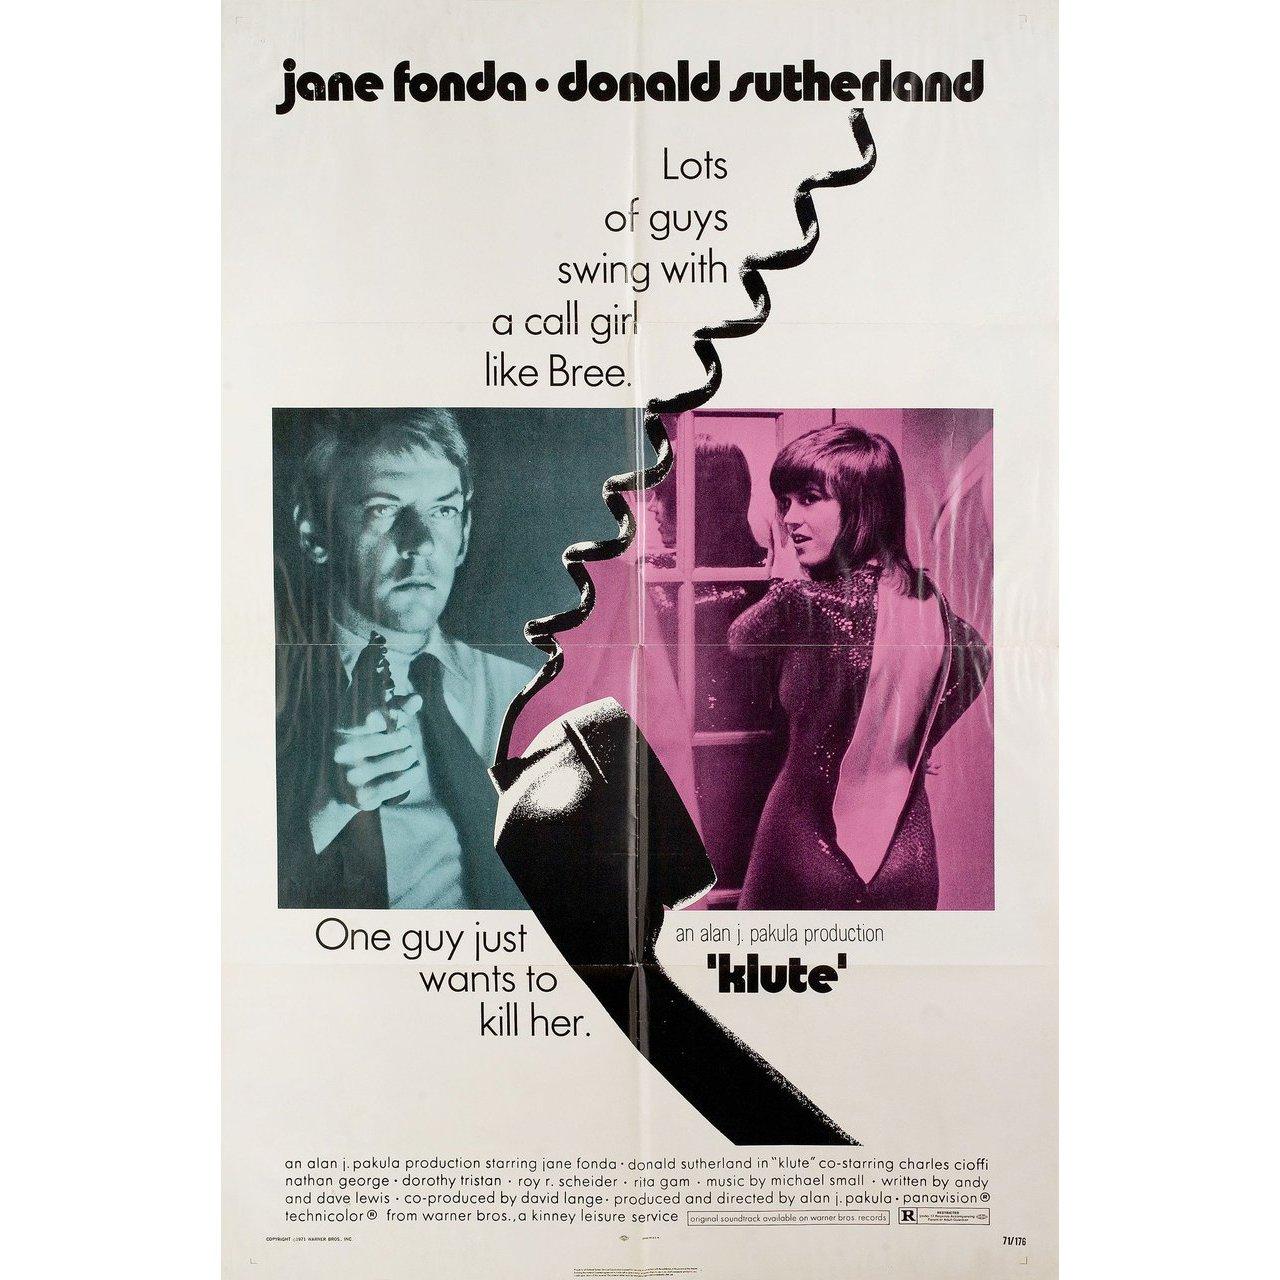 Original 1971 U.S. one sheet poster by Bill Gold for the film Klute directed by Alan J. Pakula with Jane Fonda / Donald Sutherland / Charles Cioffi / Roy Scheider. Very good fine condition, folded. Many original posters were issued folded or were